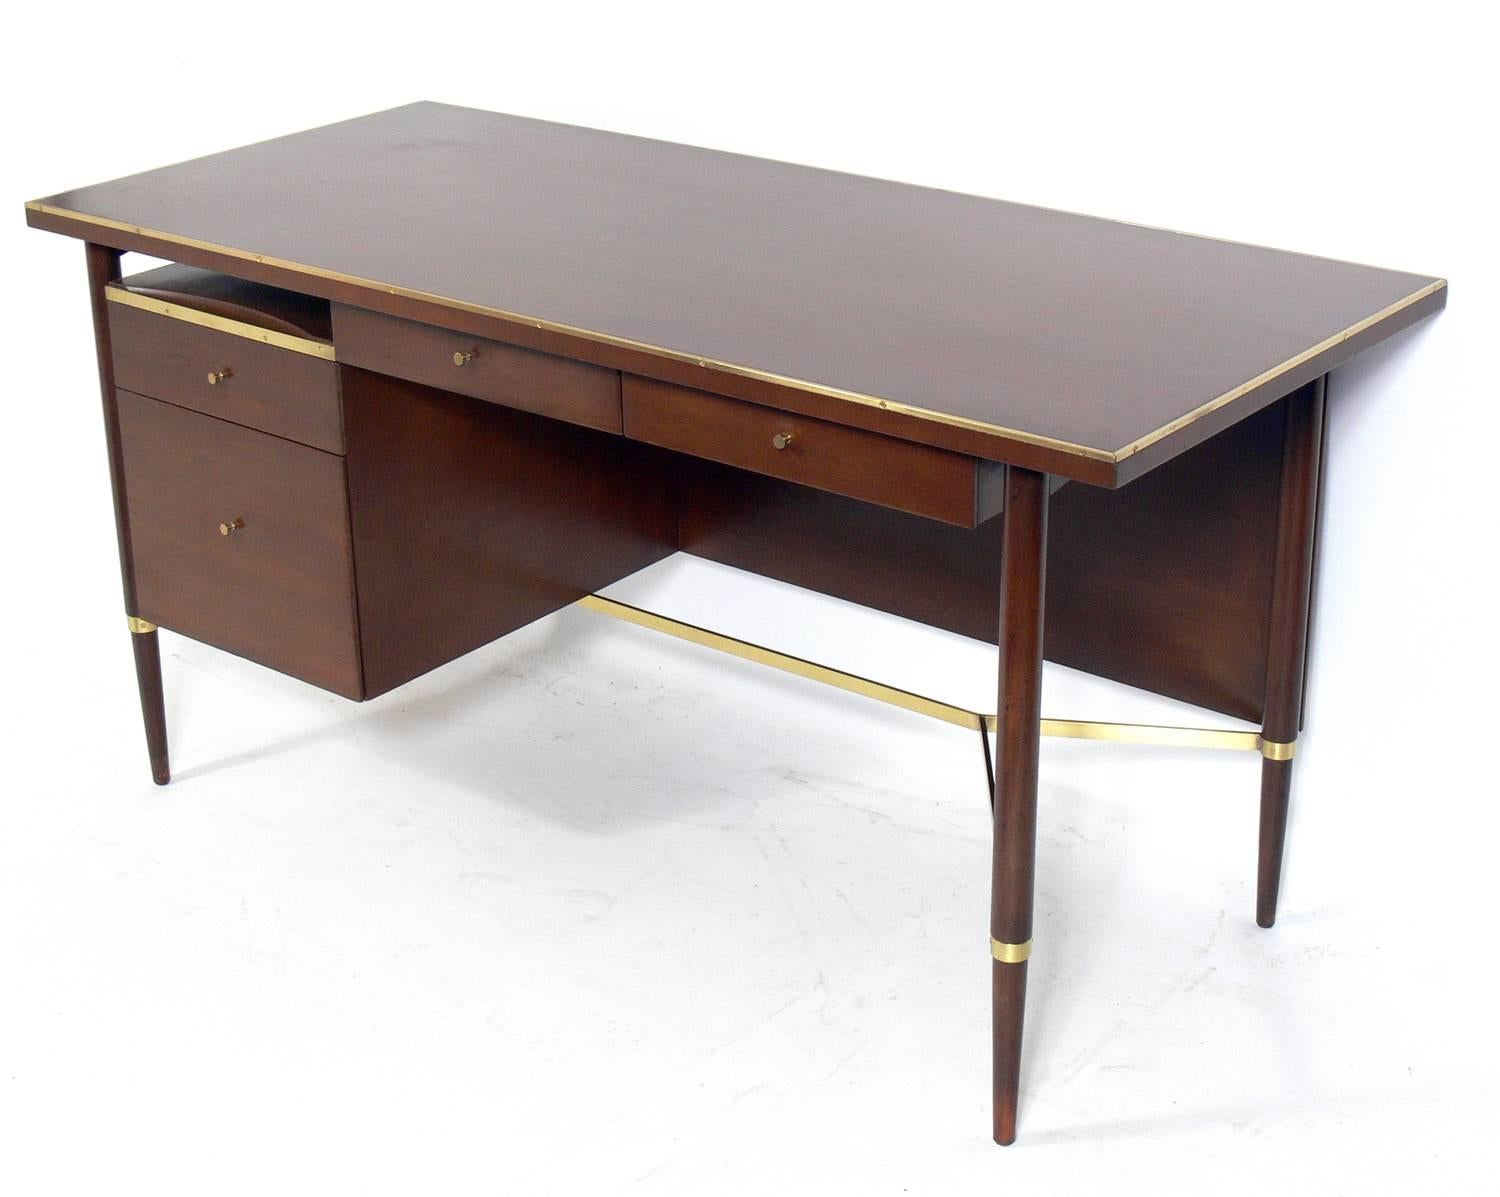 Clean lined modern desk, designed by Paul McCobb, American, circa 1960s. This desk is currently being refinished and can be completed in your choice of finish color. The price noted includes refinishing in your choice of finish color.